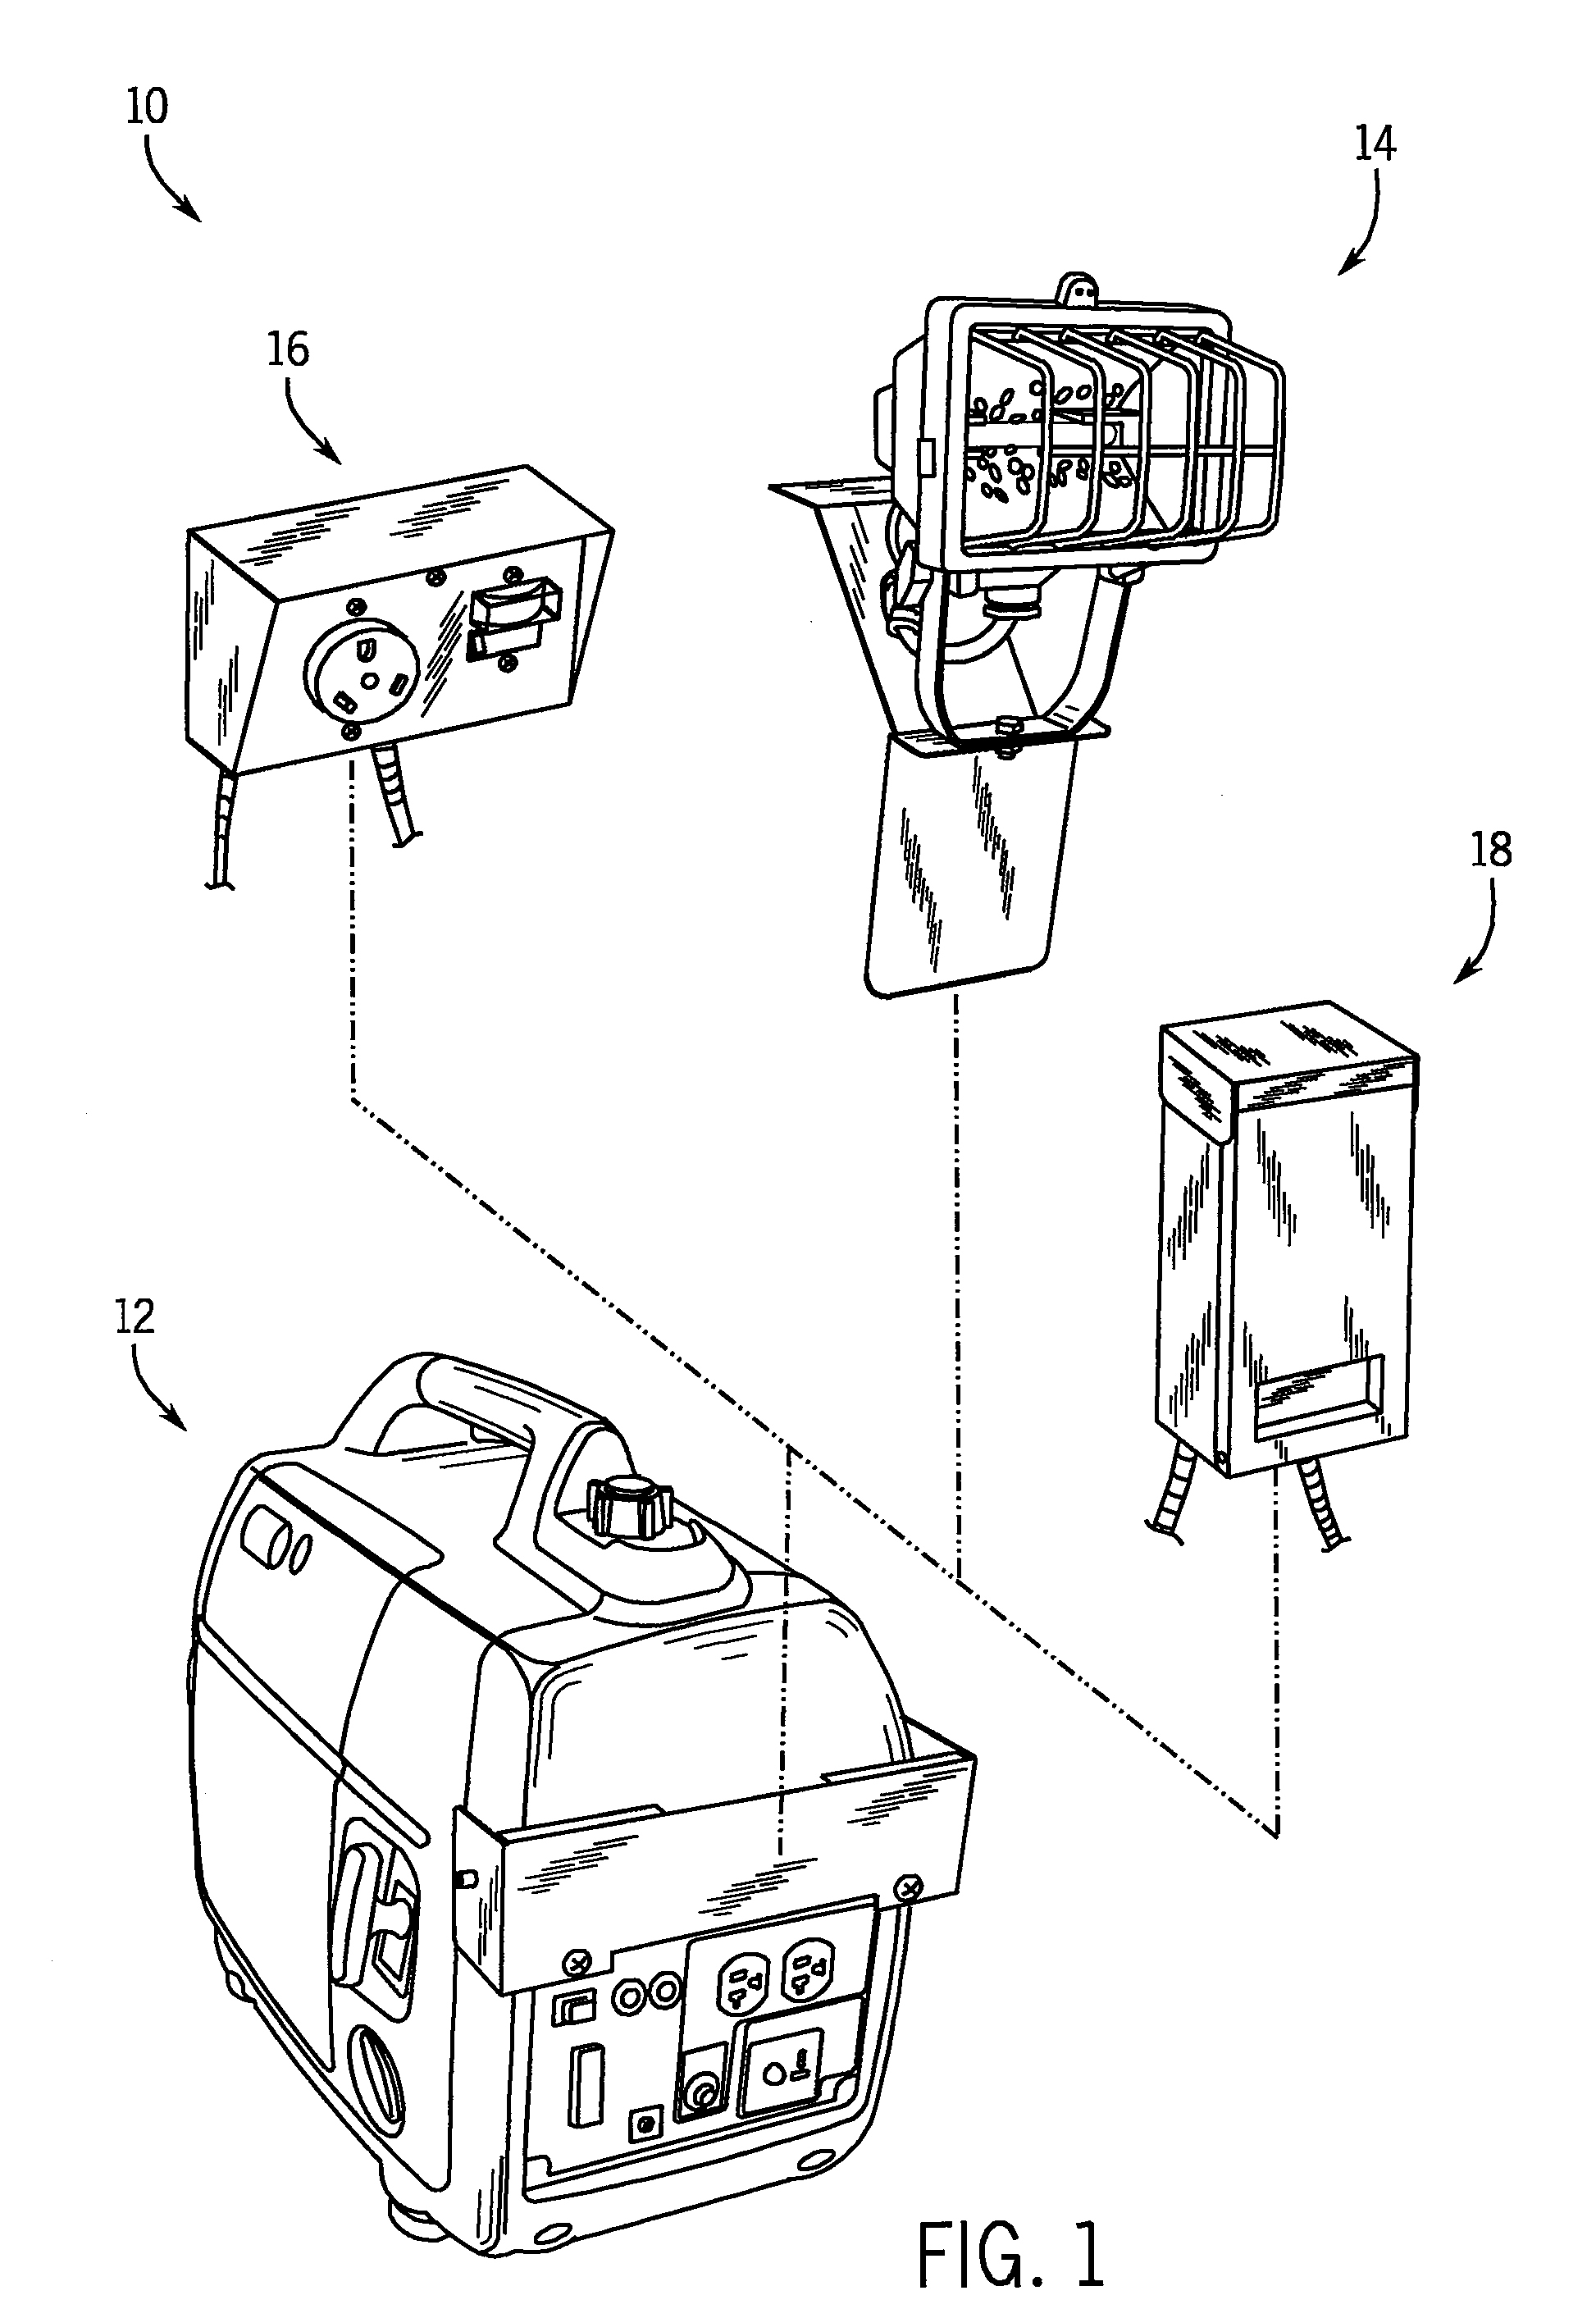 Vibration absorbing mount for attaching an accessory to a portable power source